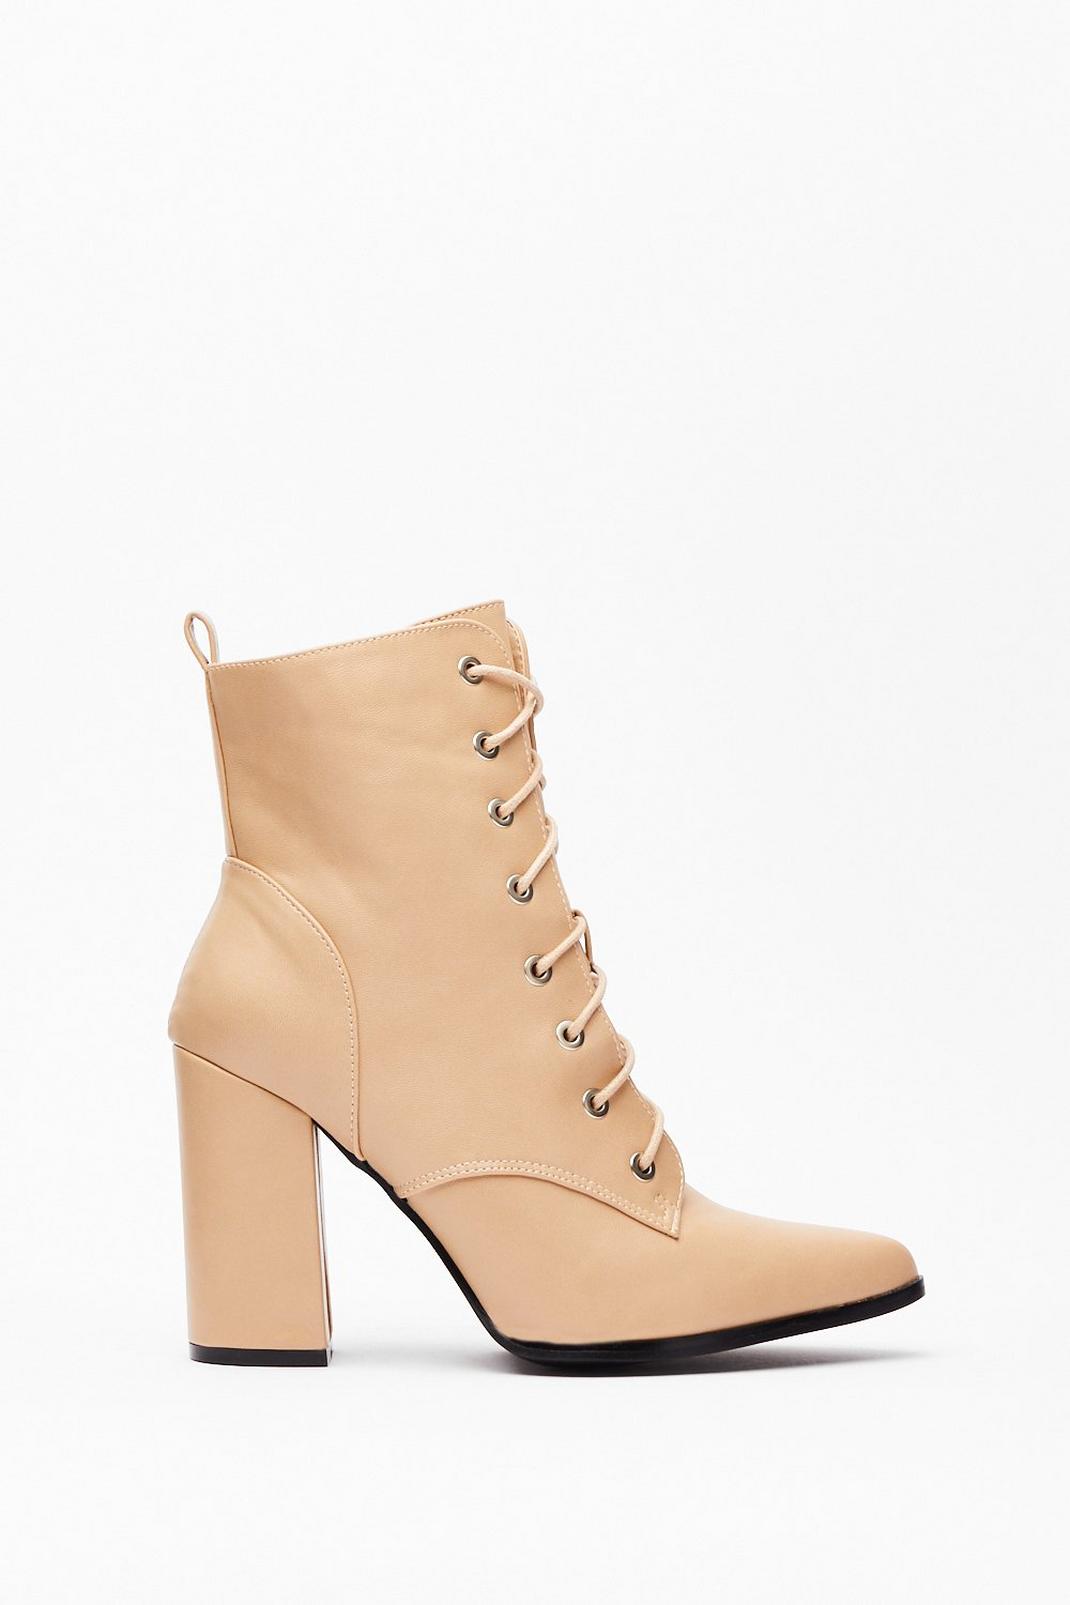 Beige Thanks for Pointing That Out Lace-Up Heeled Boots image number 1